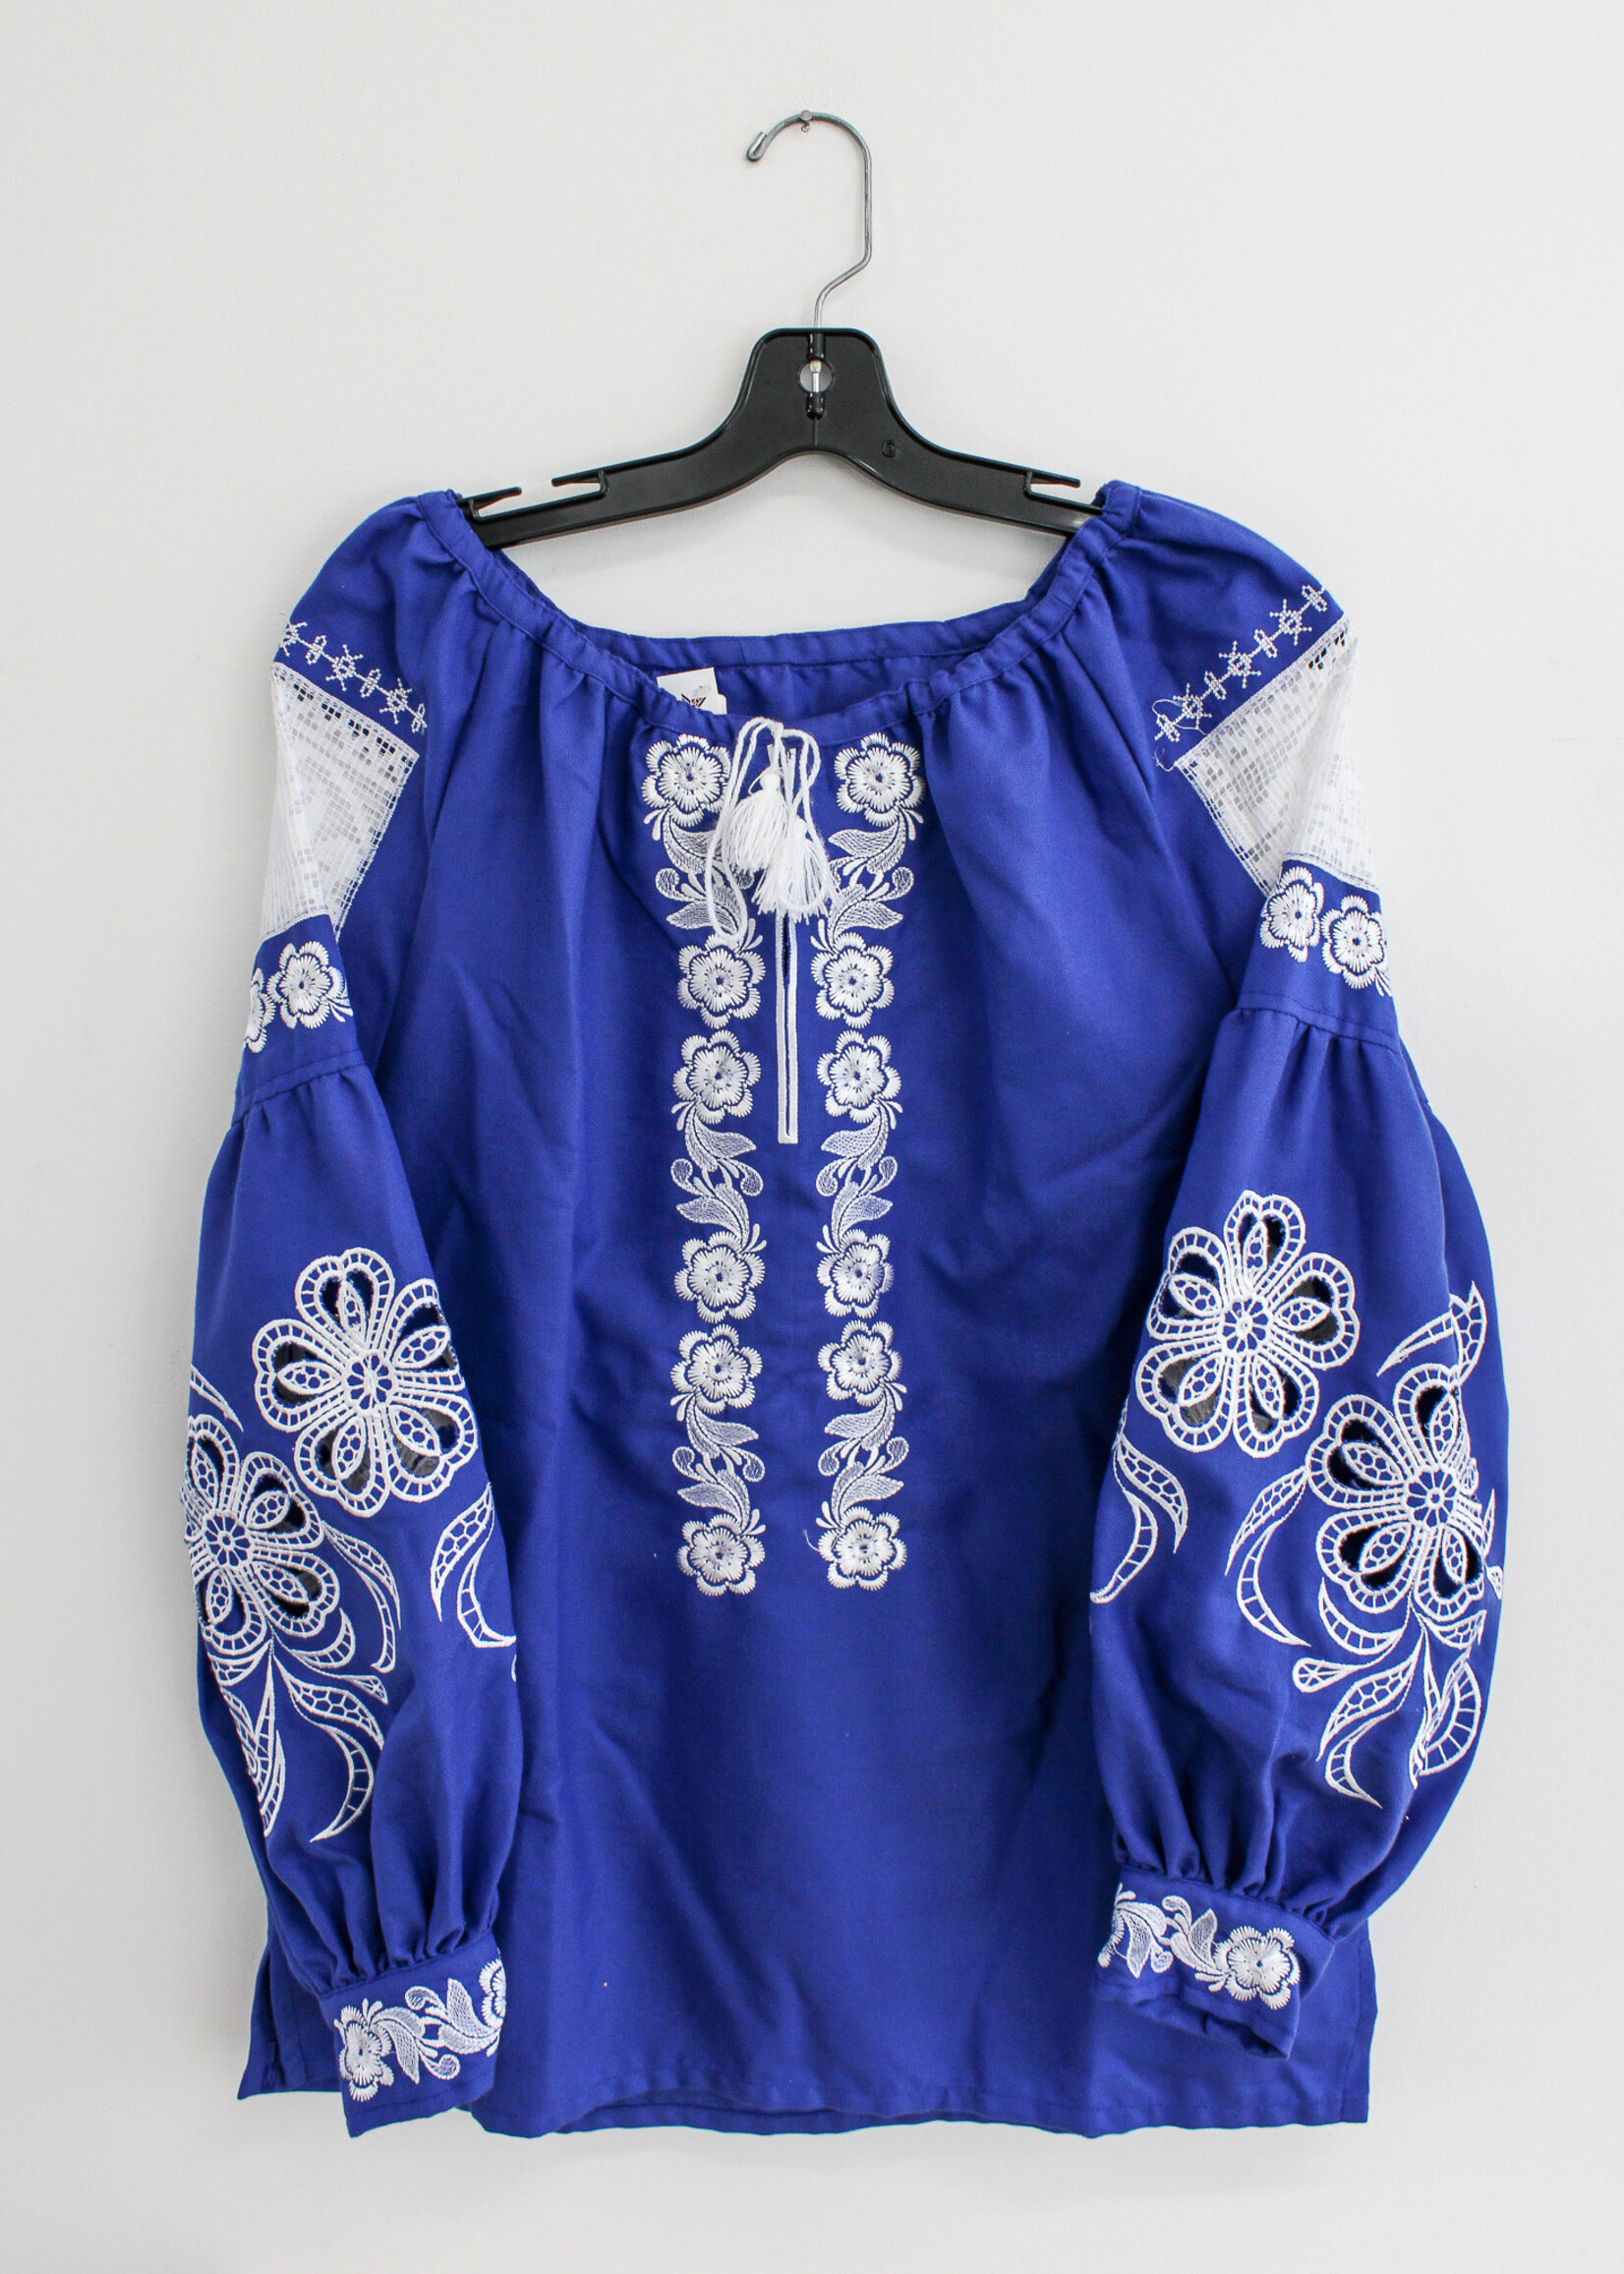 VYSHYVANKA - Bust: 44 in. Blue with white floral pattern